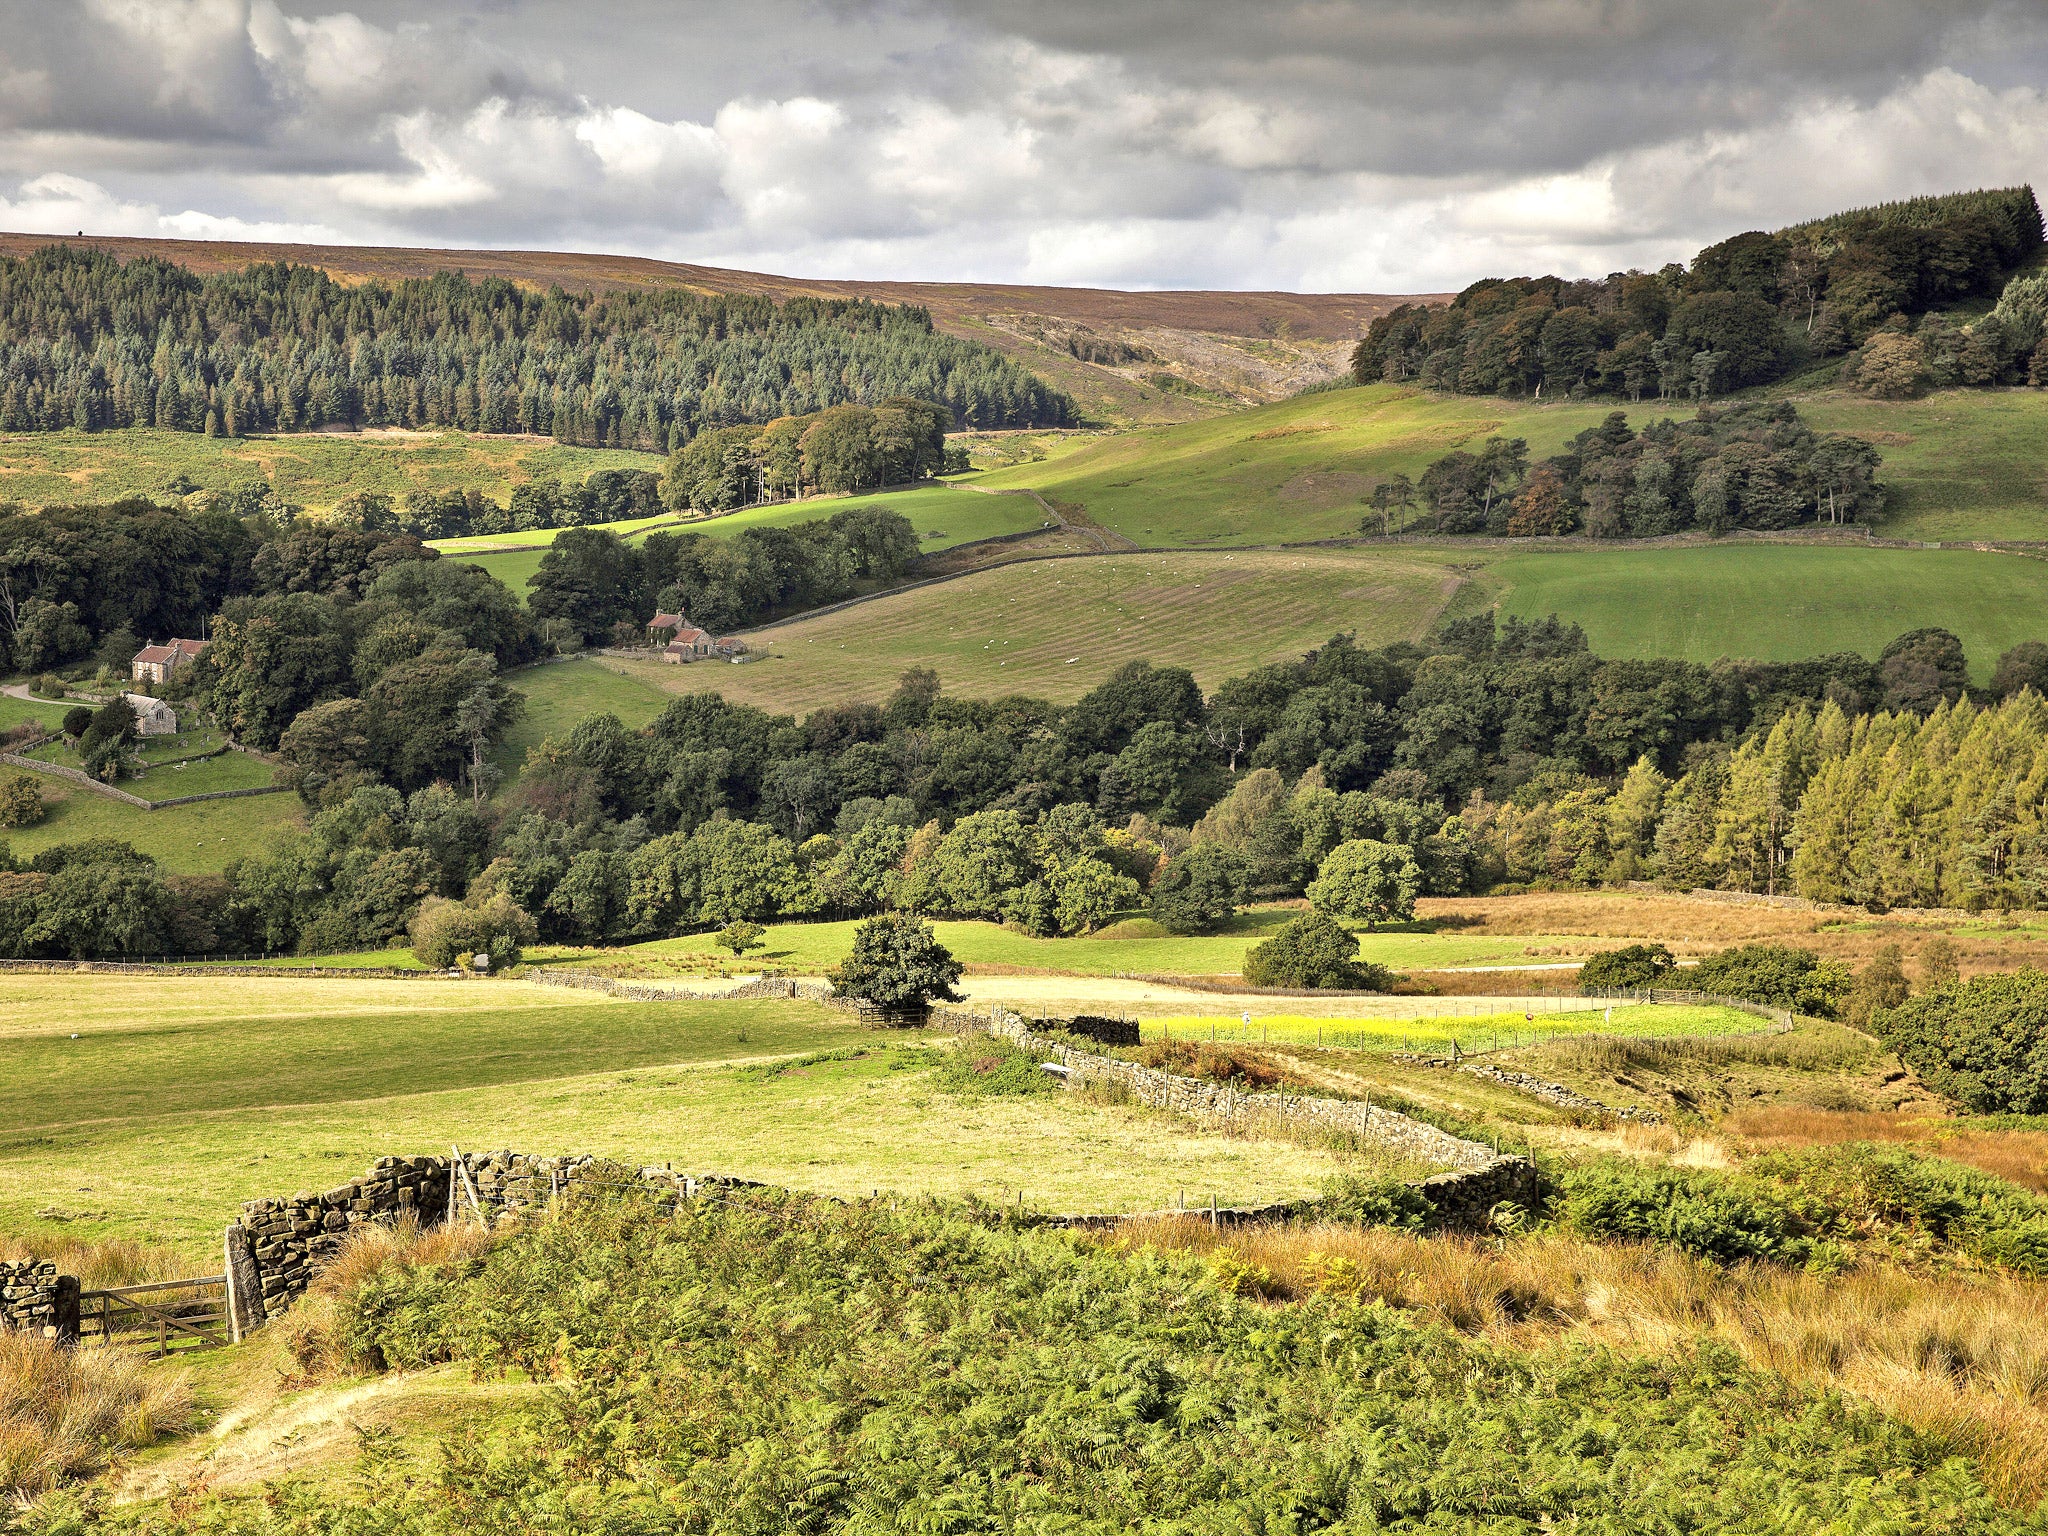 The Campaign for National Parks said the developments are in 'danger of destroying the integrity' of the North York Moors